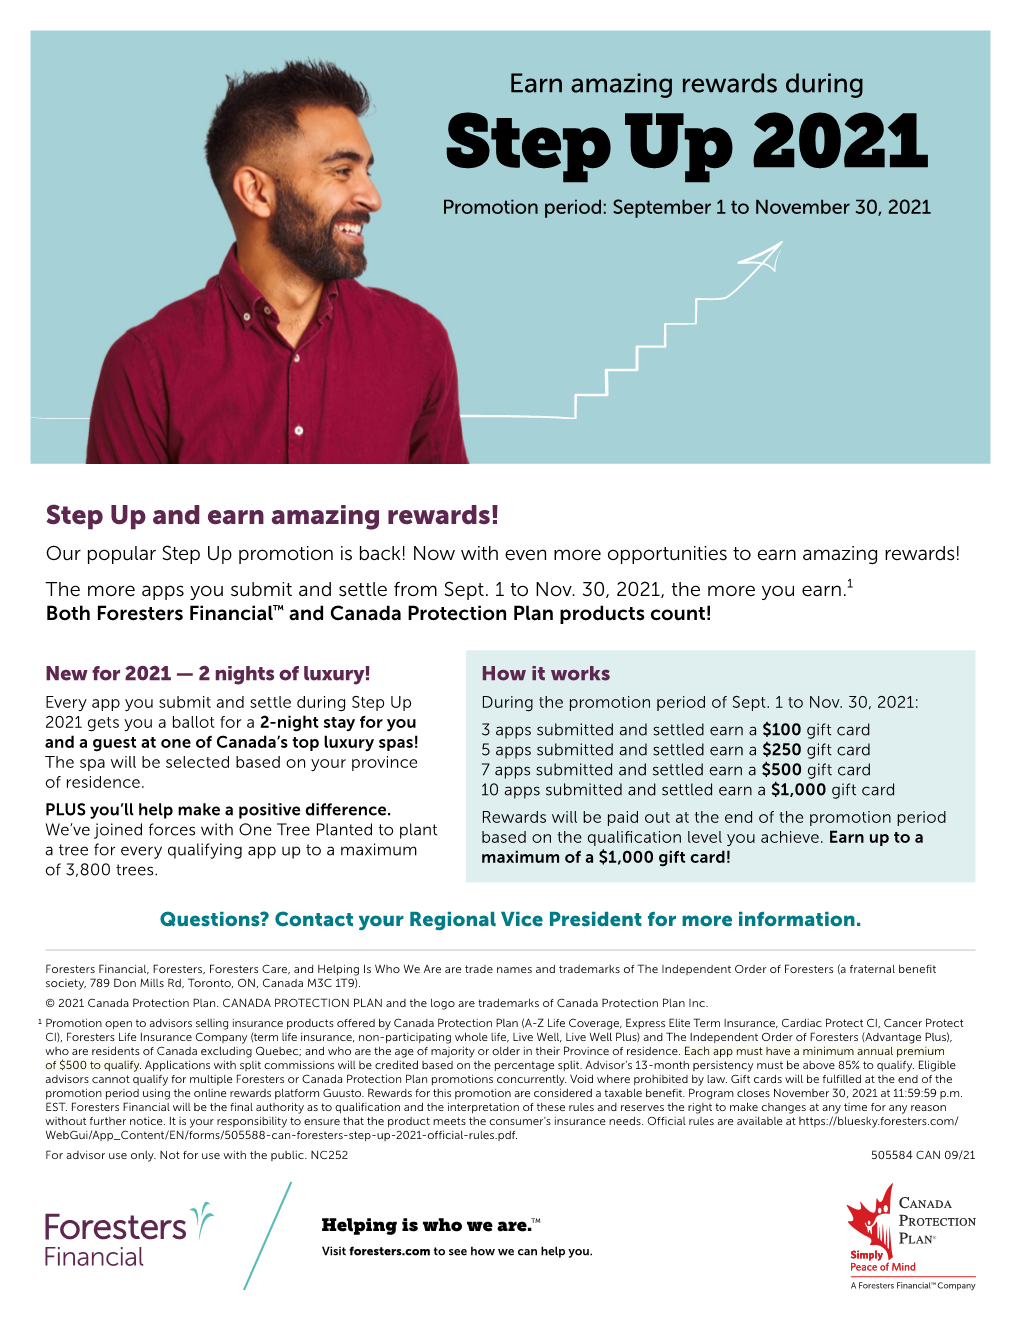 Step up 2021 Promotion Period: September 1 to November 30, 2021